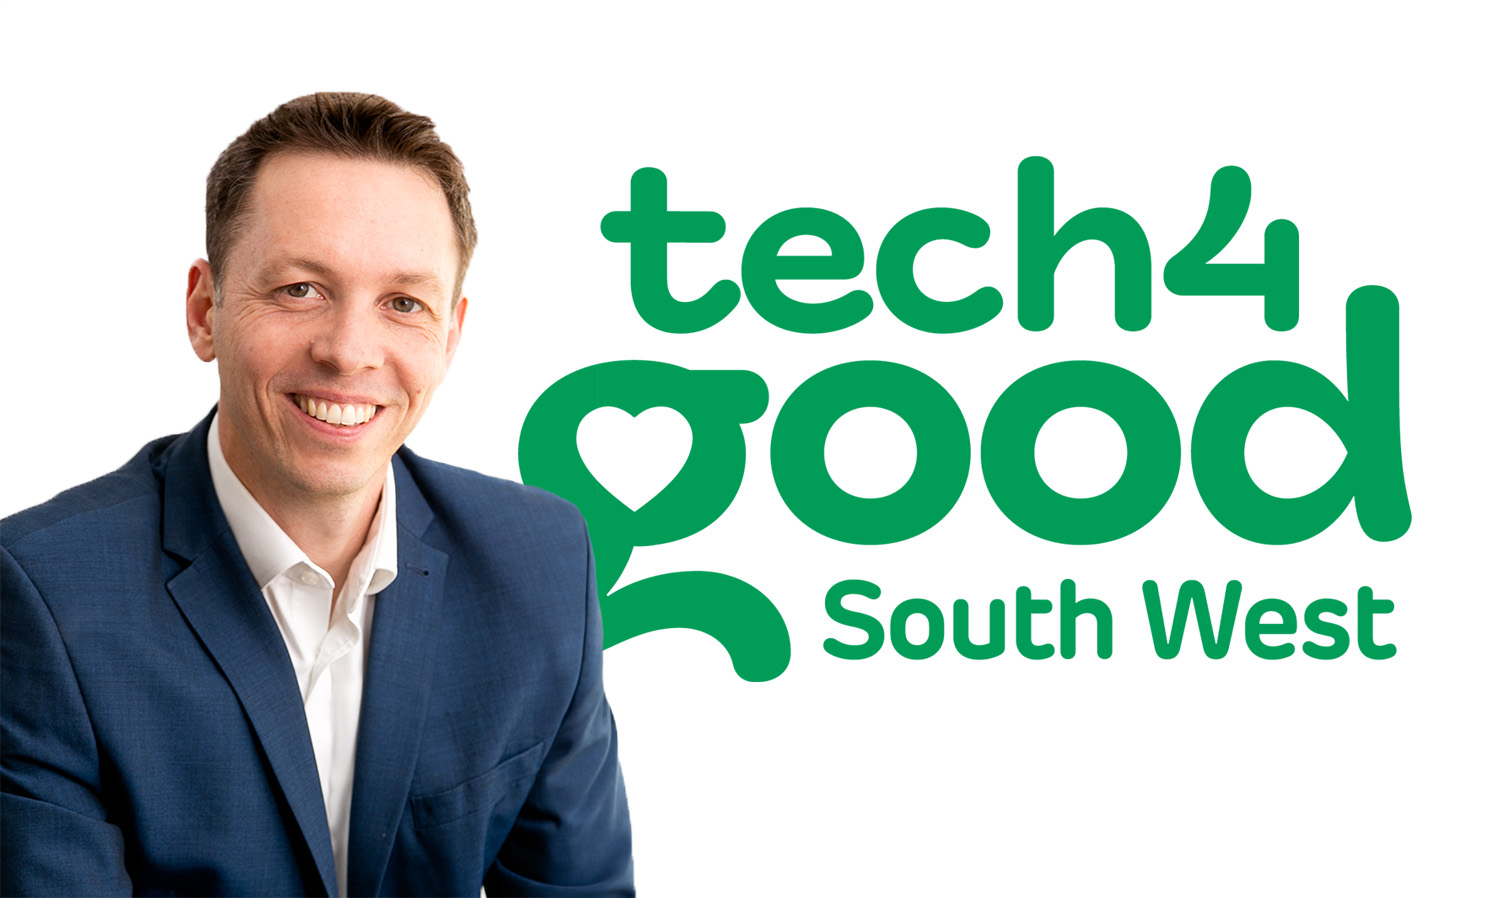 Talking all things SuSy on the Tech4Good South West podcast